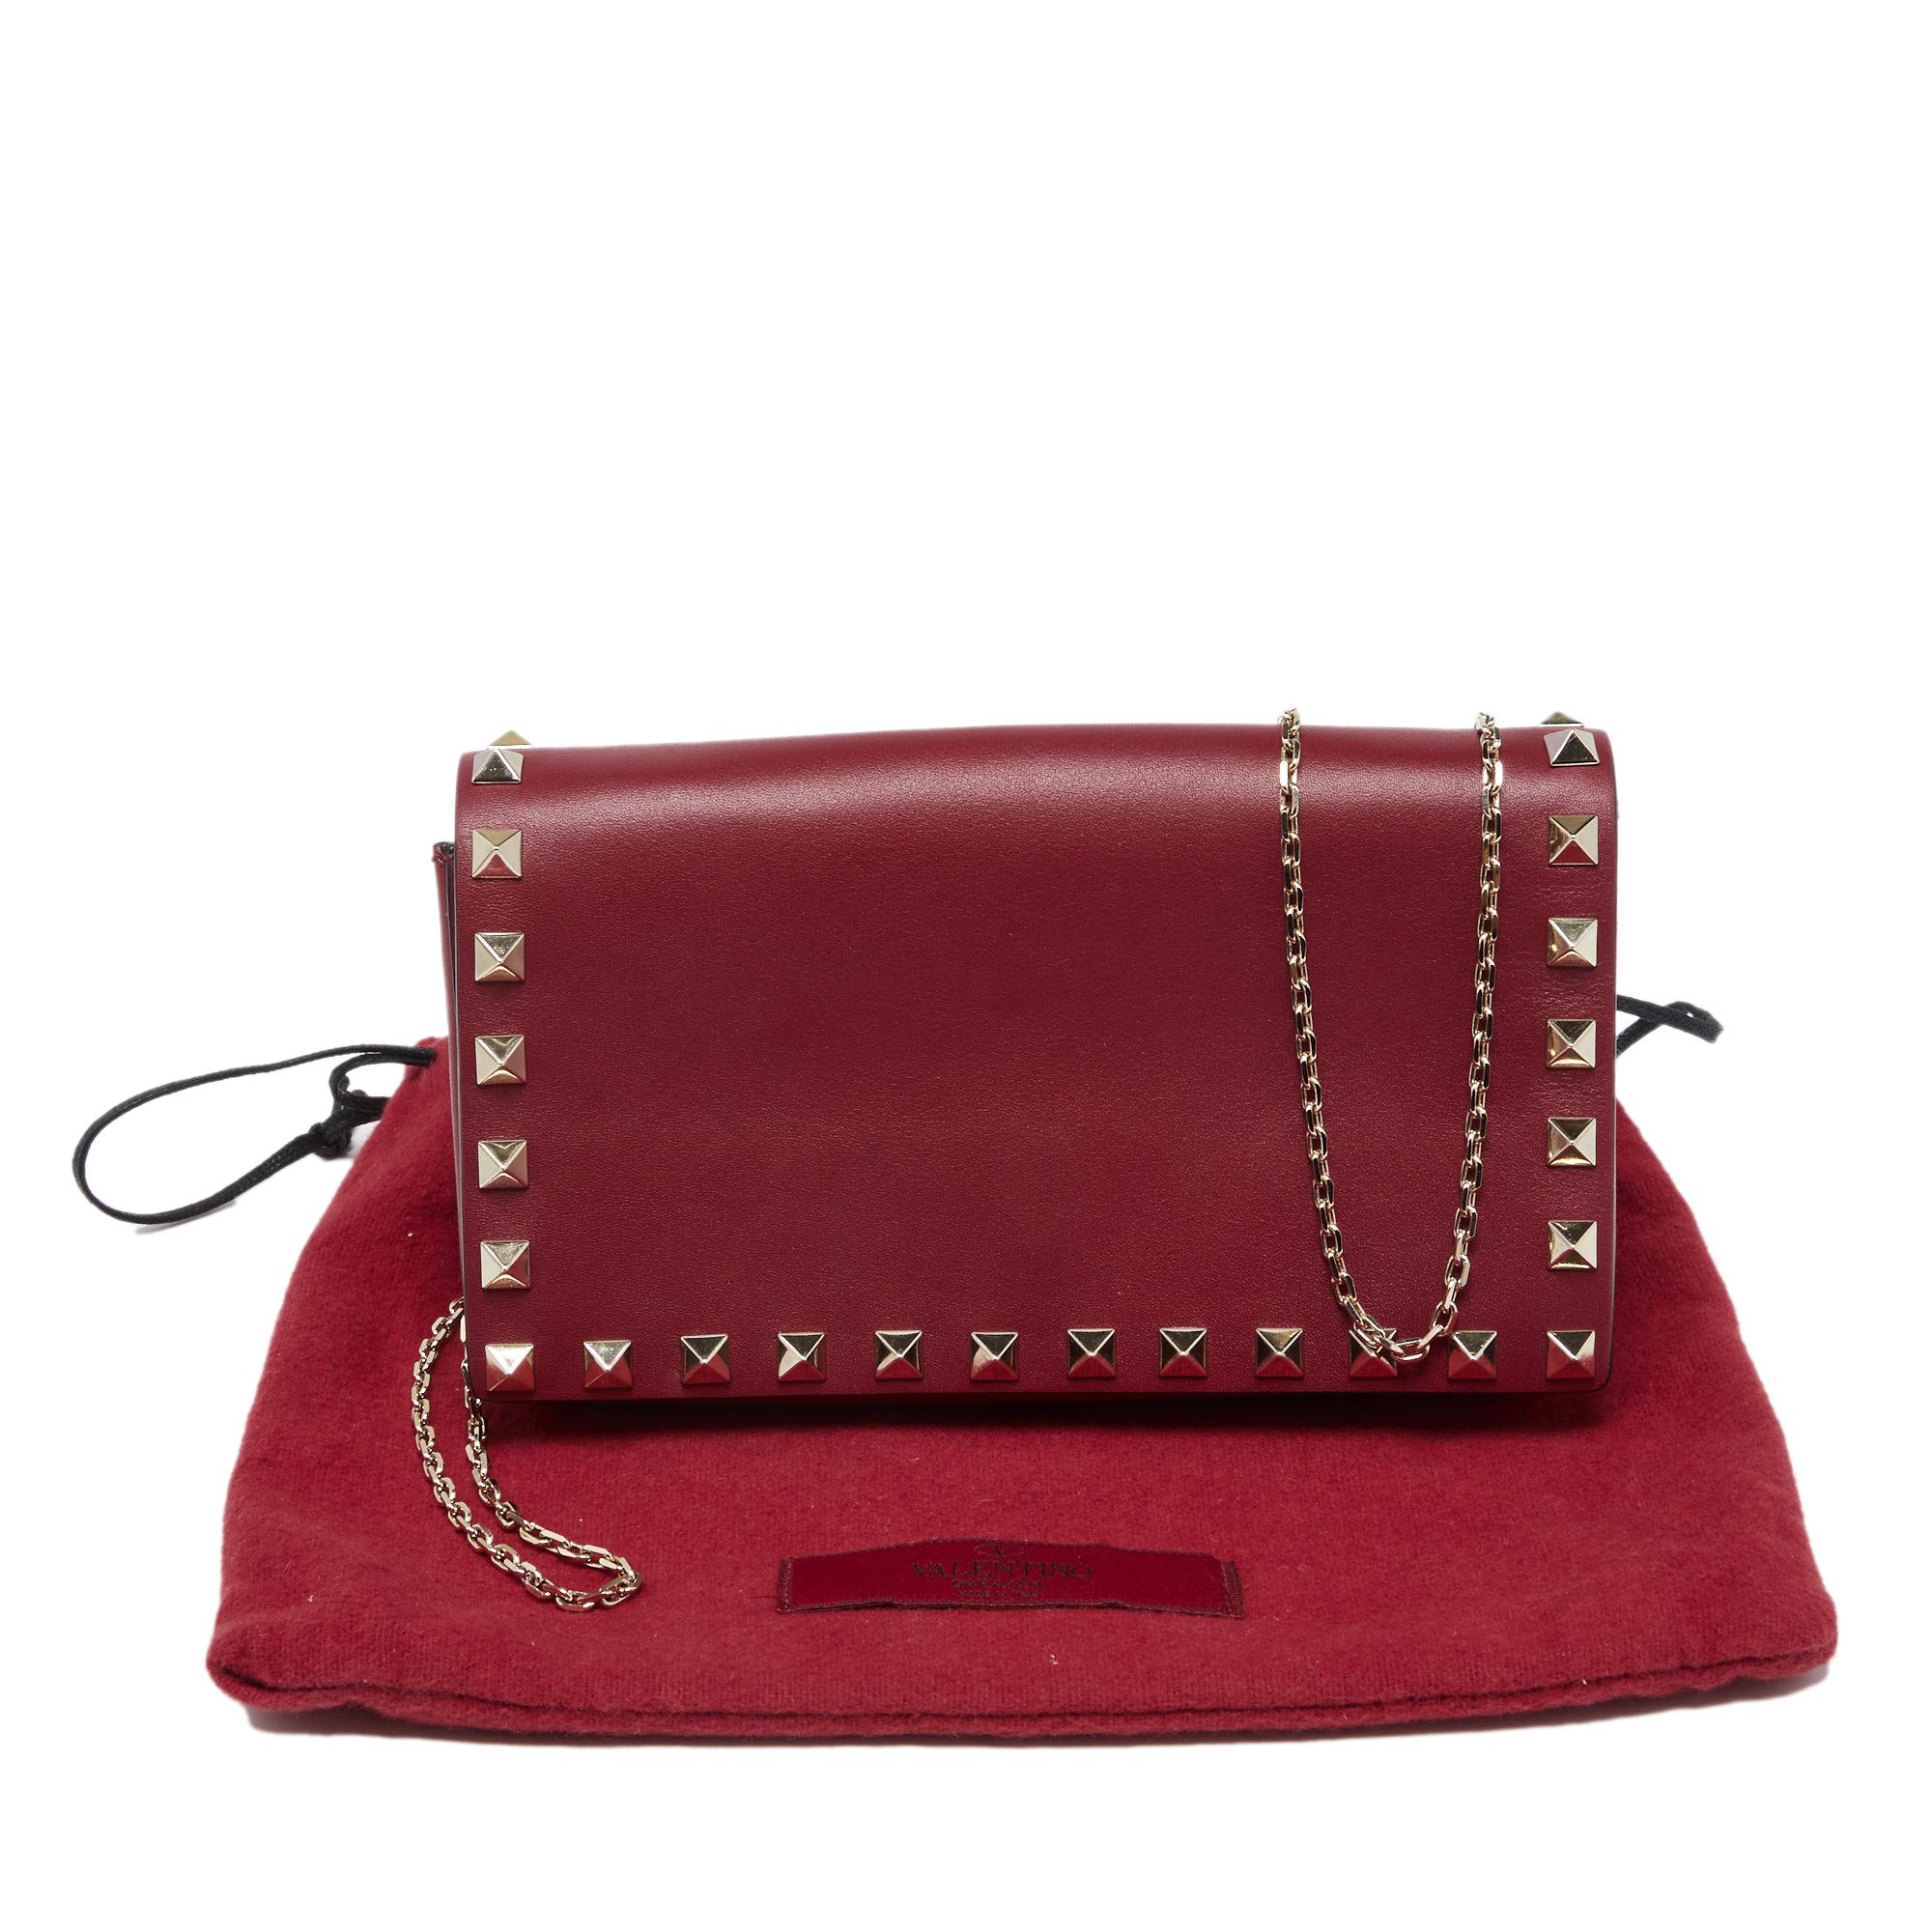 Valentino Red Leather Rockstud Chain Clutch Bag 5